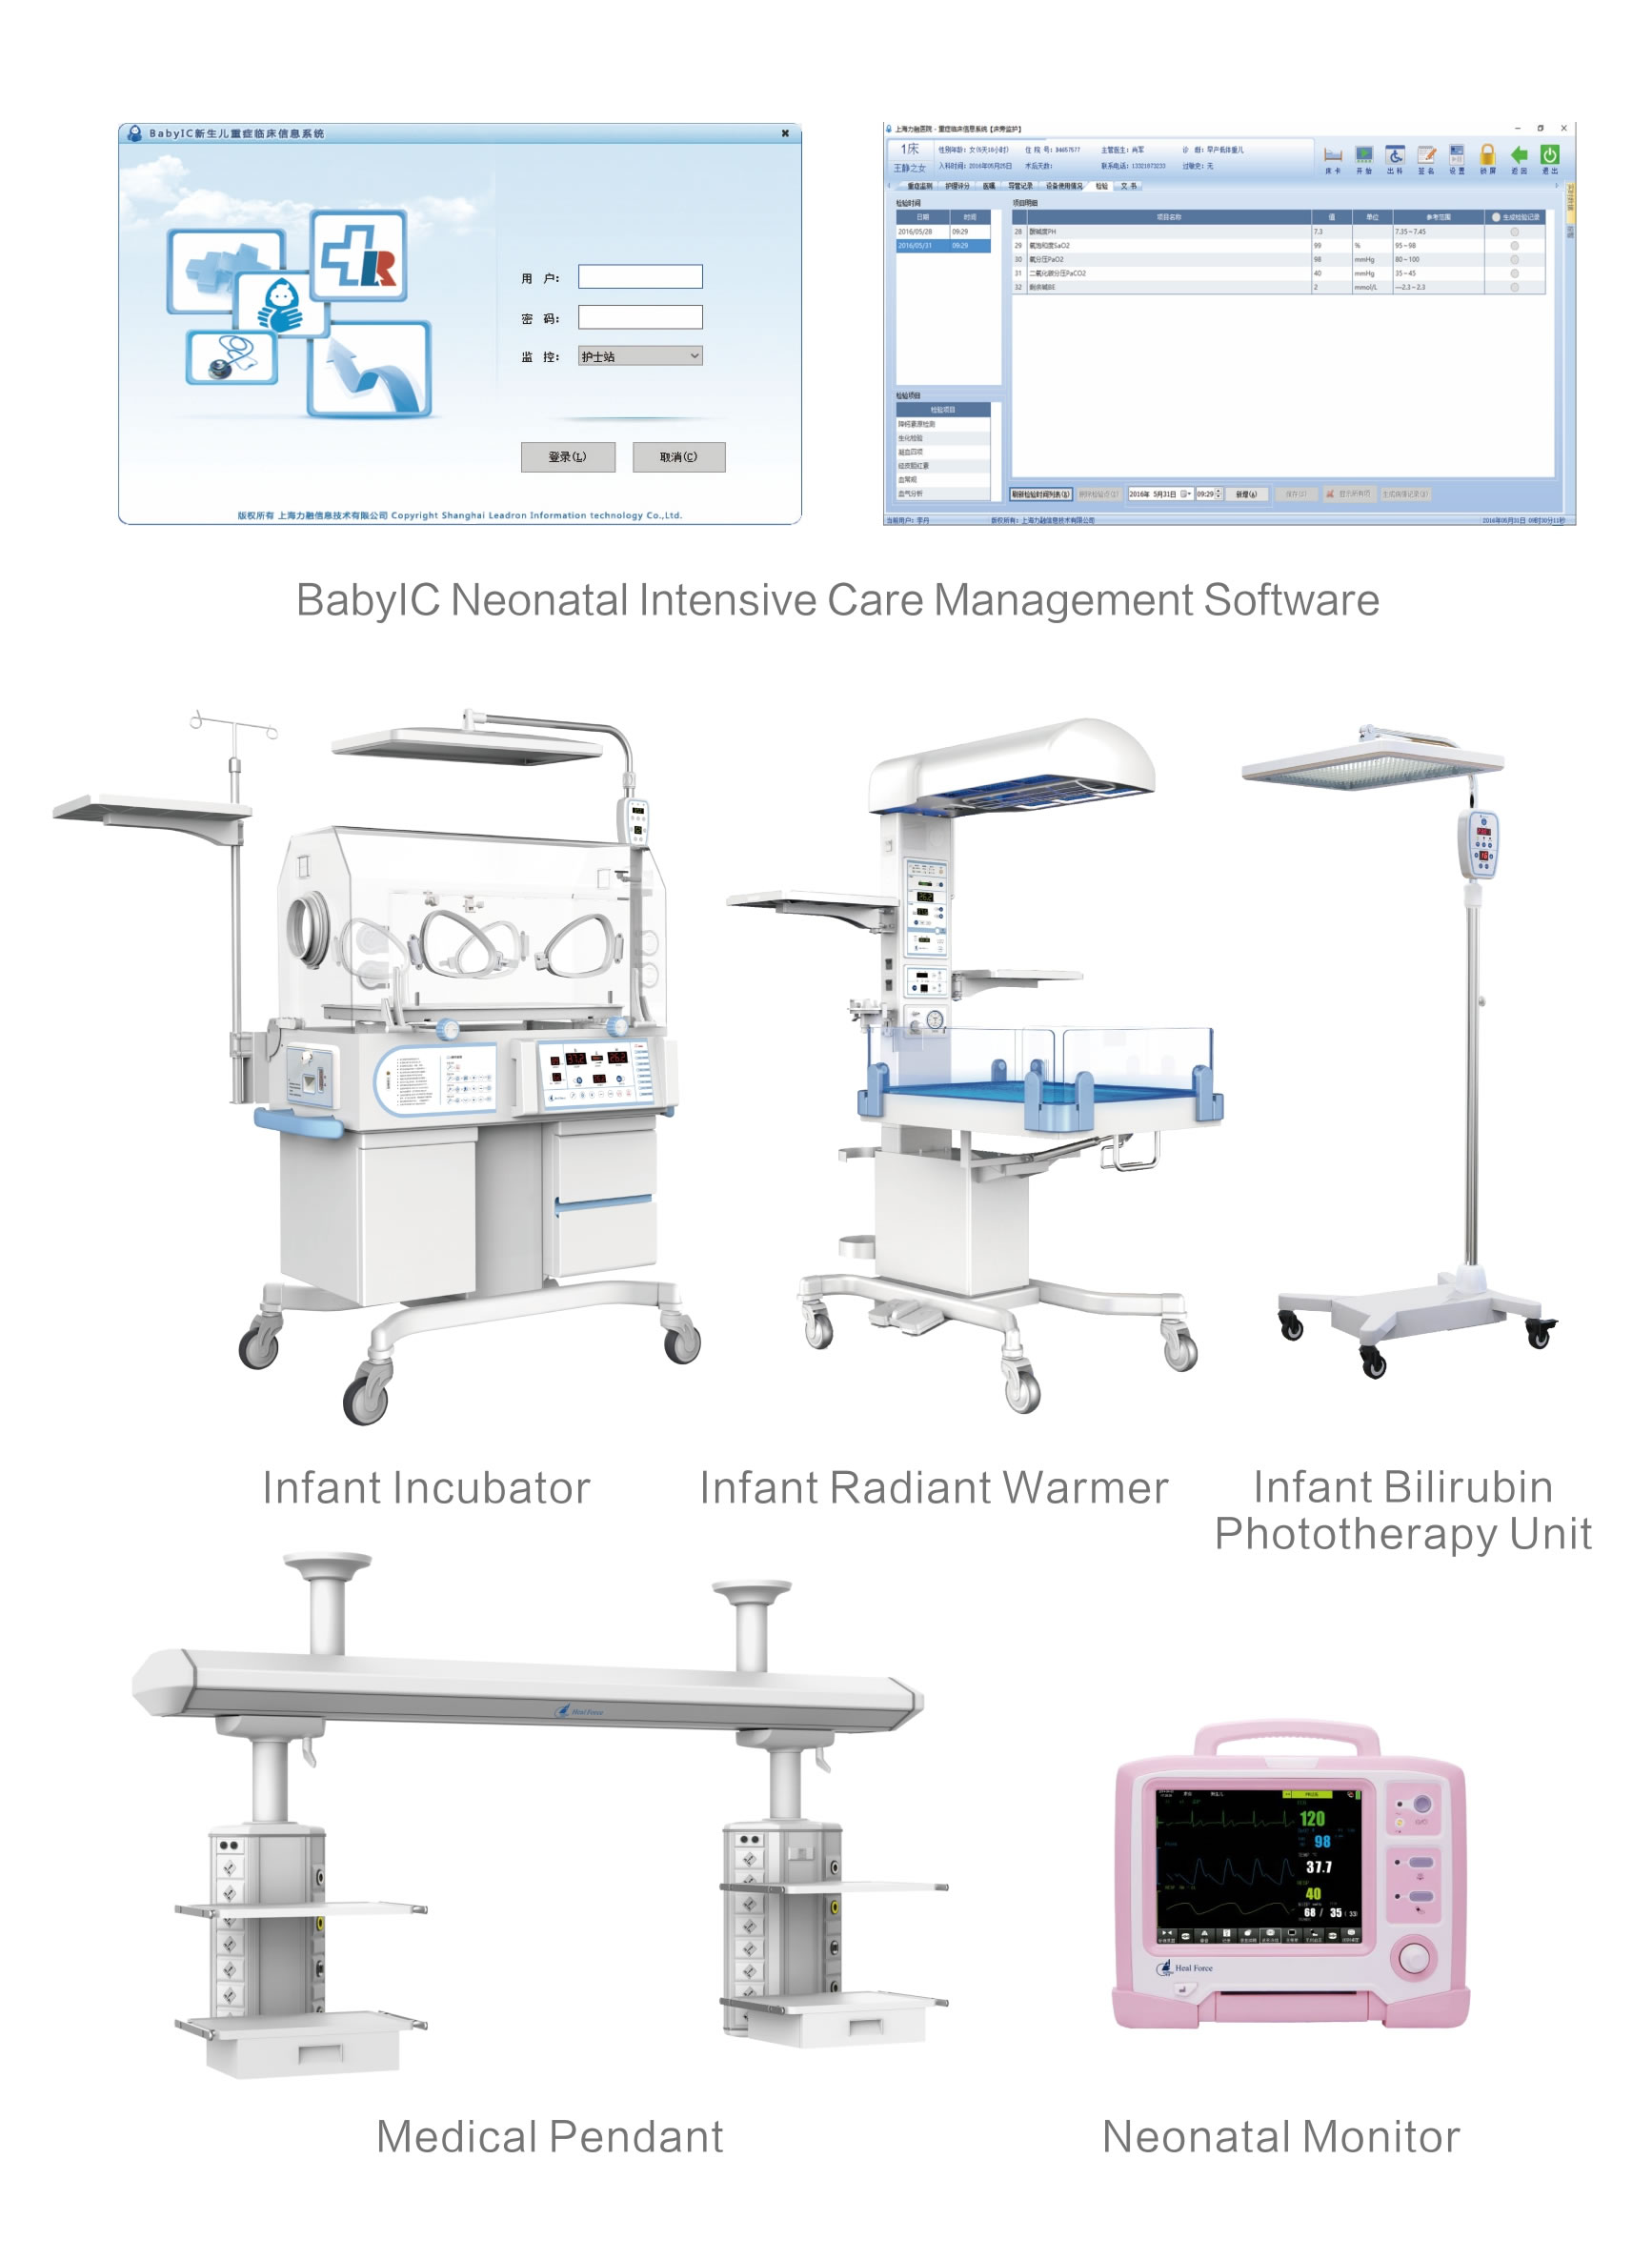 2. Heal Force Digital Neonatology Overall Solution